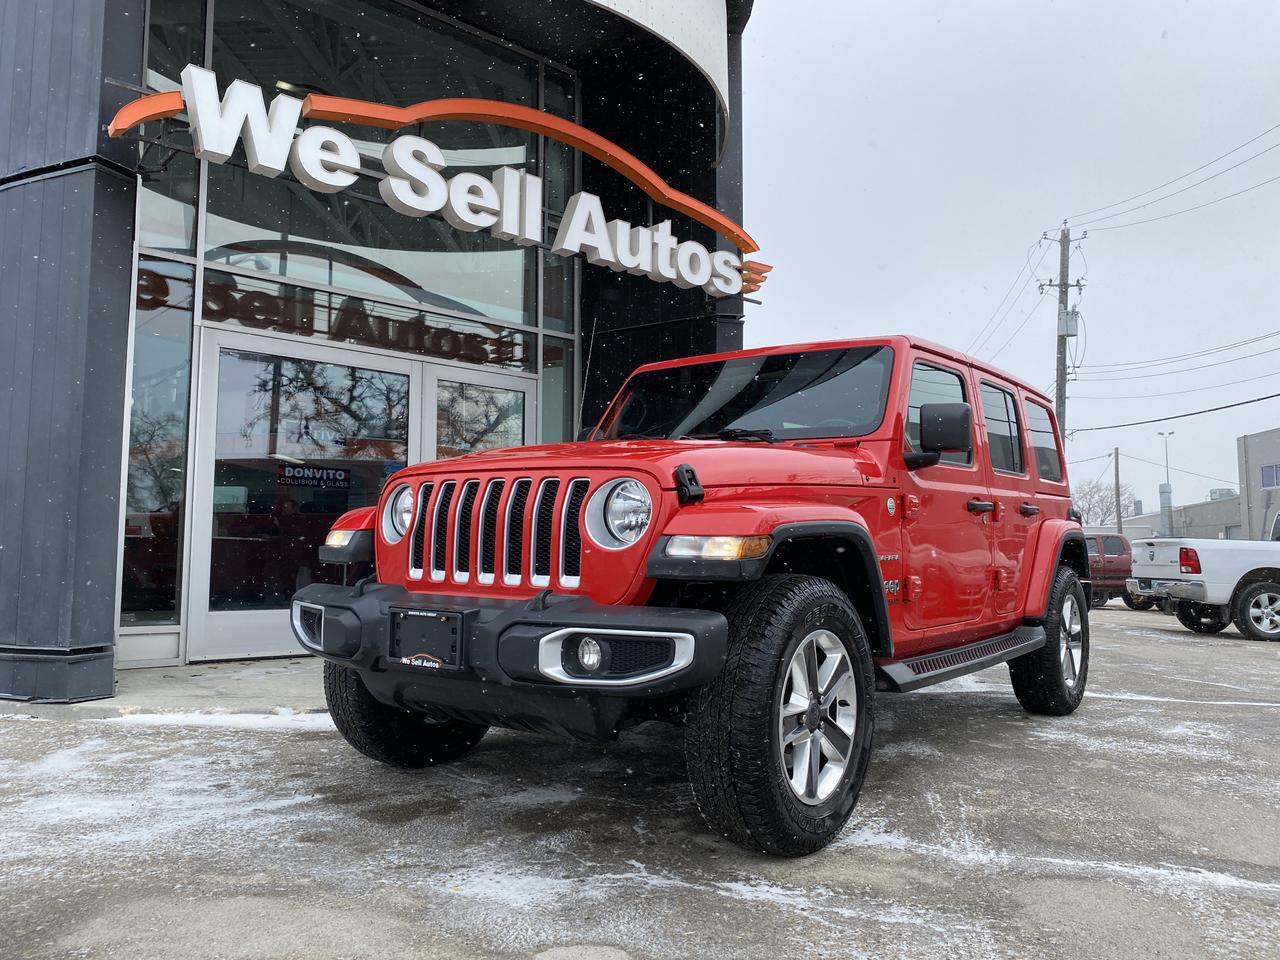 2020 Jeep WRANGLER UNLIMITED Sahara w/Leather, Navigation, FULLY LOADED!!